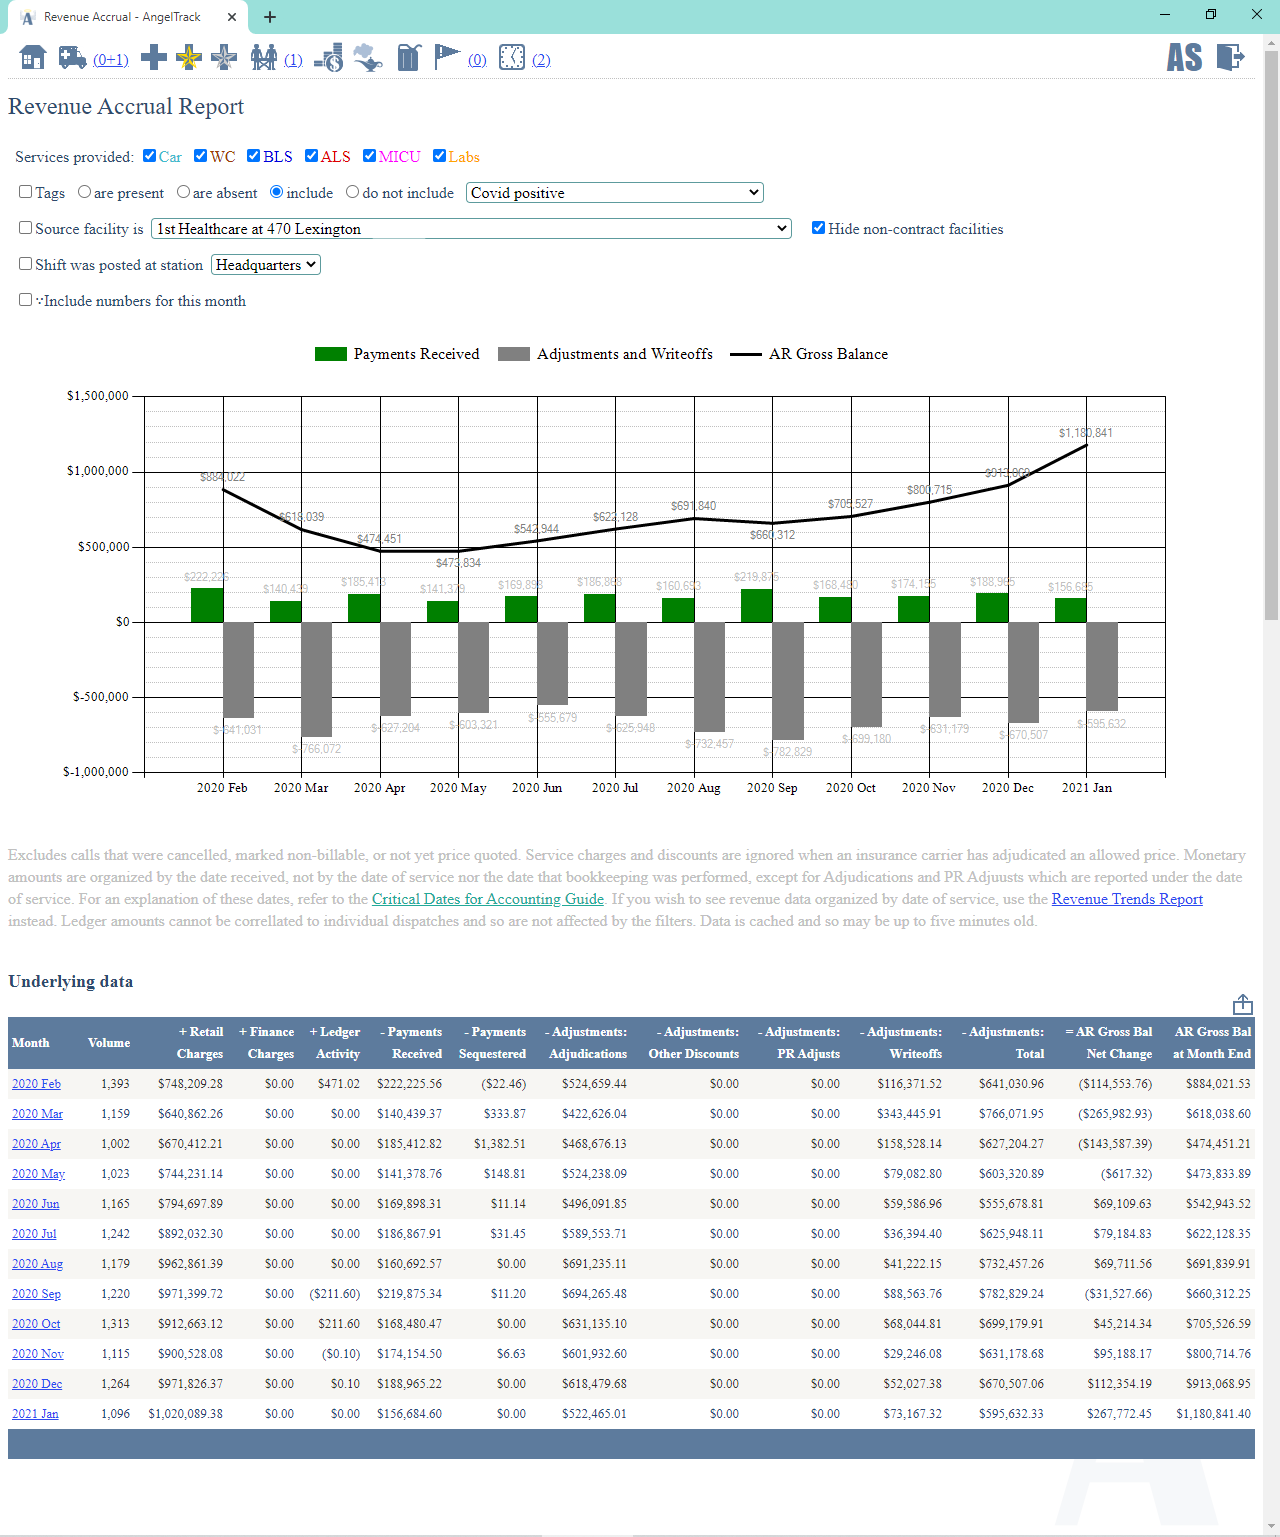 AngelTrack month-by-month revenue accrual